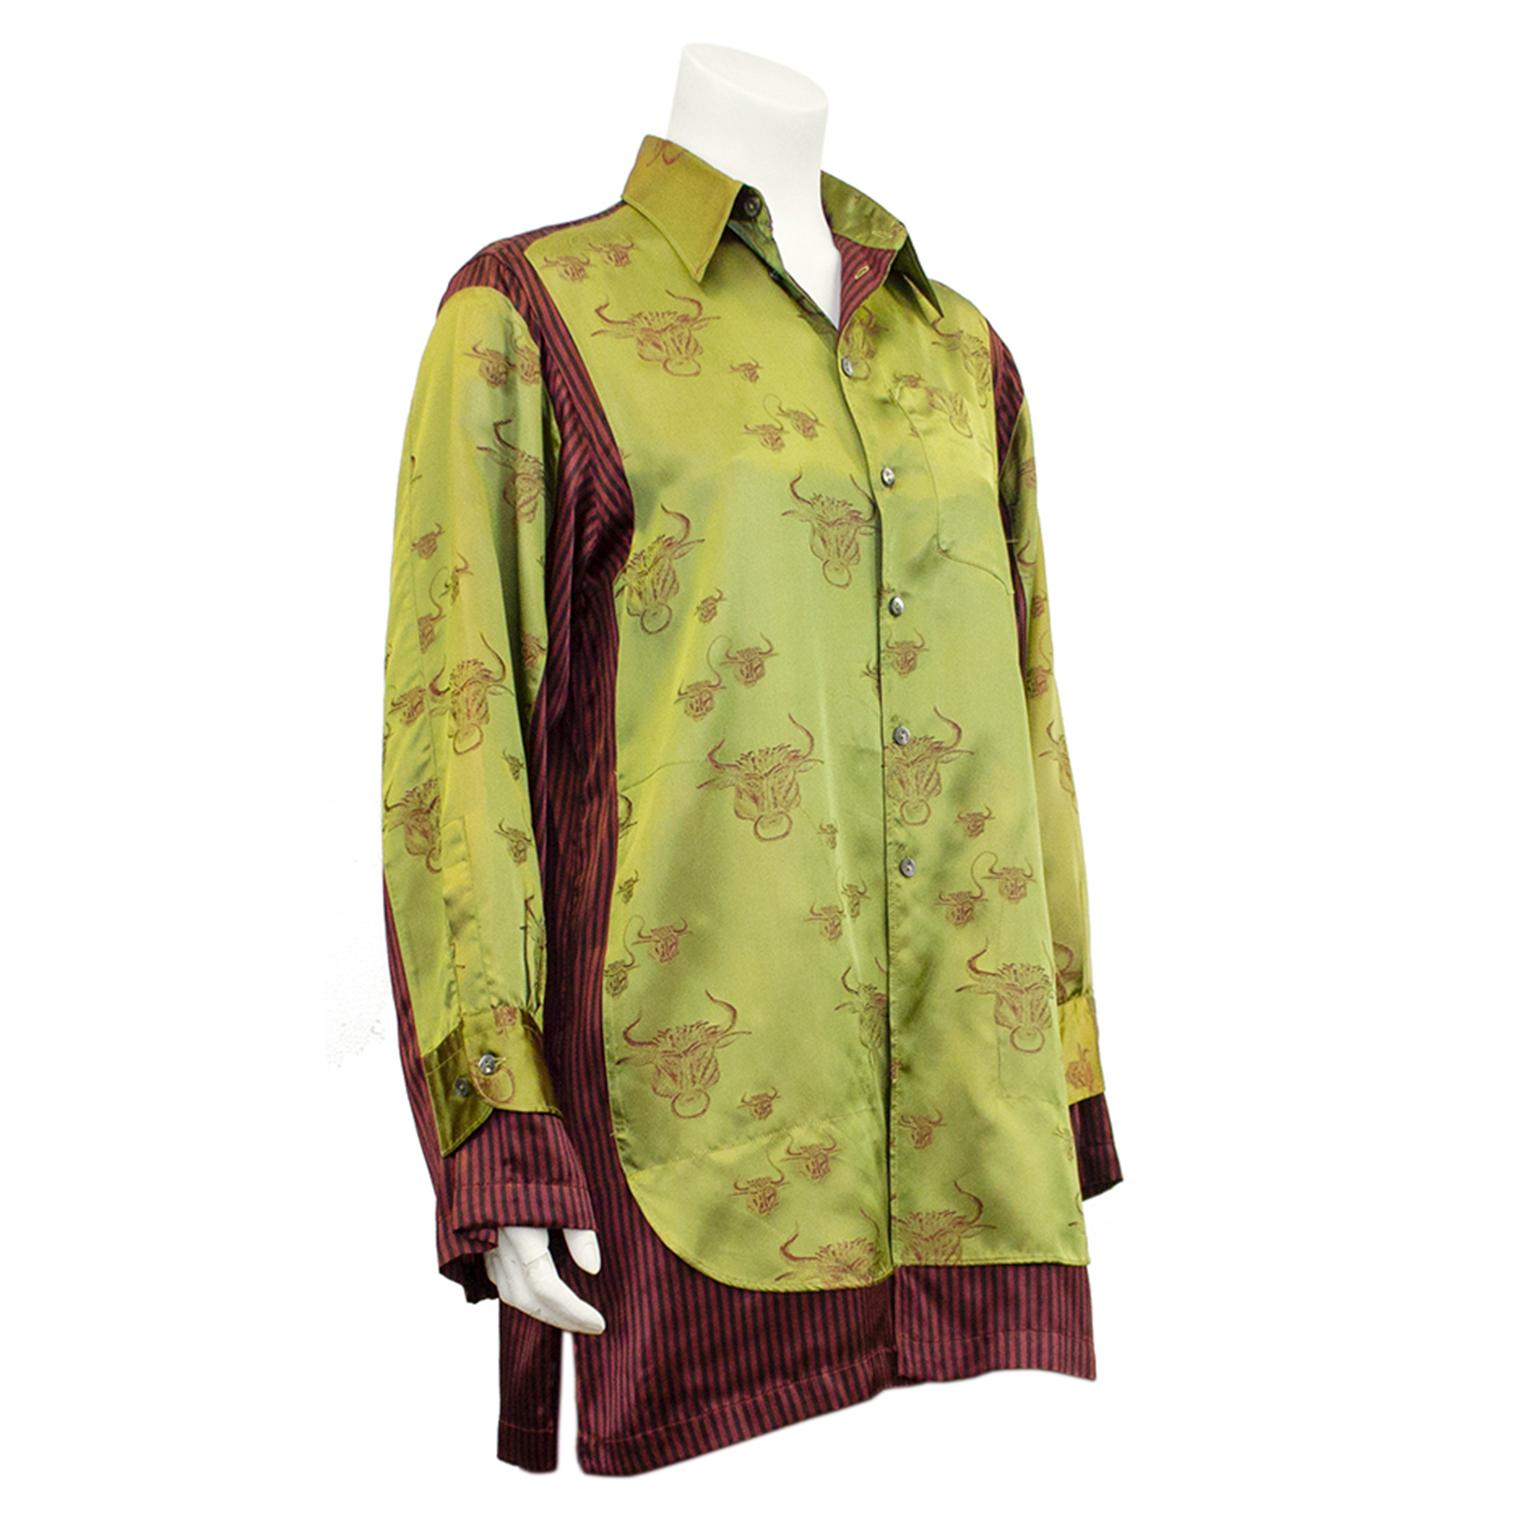 1990s fabulous Jean Paul Gaultier Femme pyjama style oversized shirt with olive green silk jacquard with an all over print of oxblood Spanish bulls. Contrasting red and black vertical striped silk trims the shirt.  Size IT 40. Excellent vintage